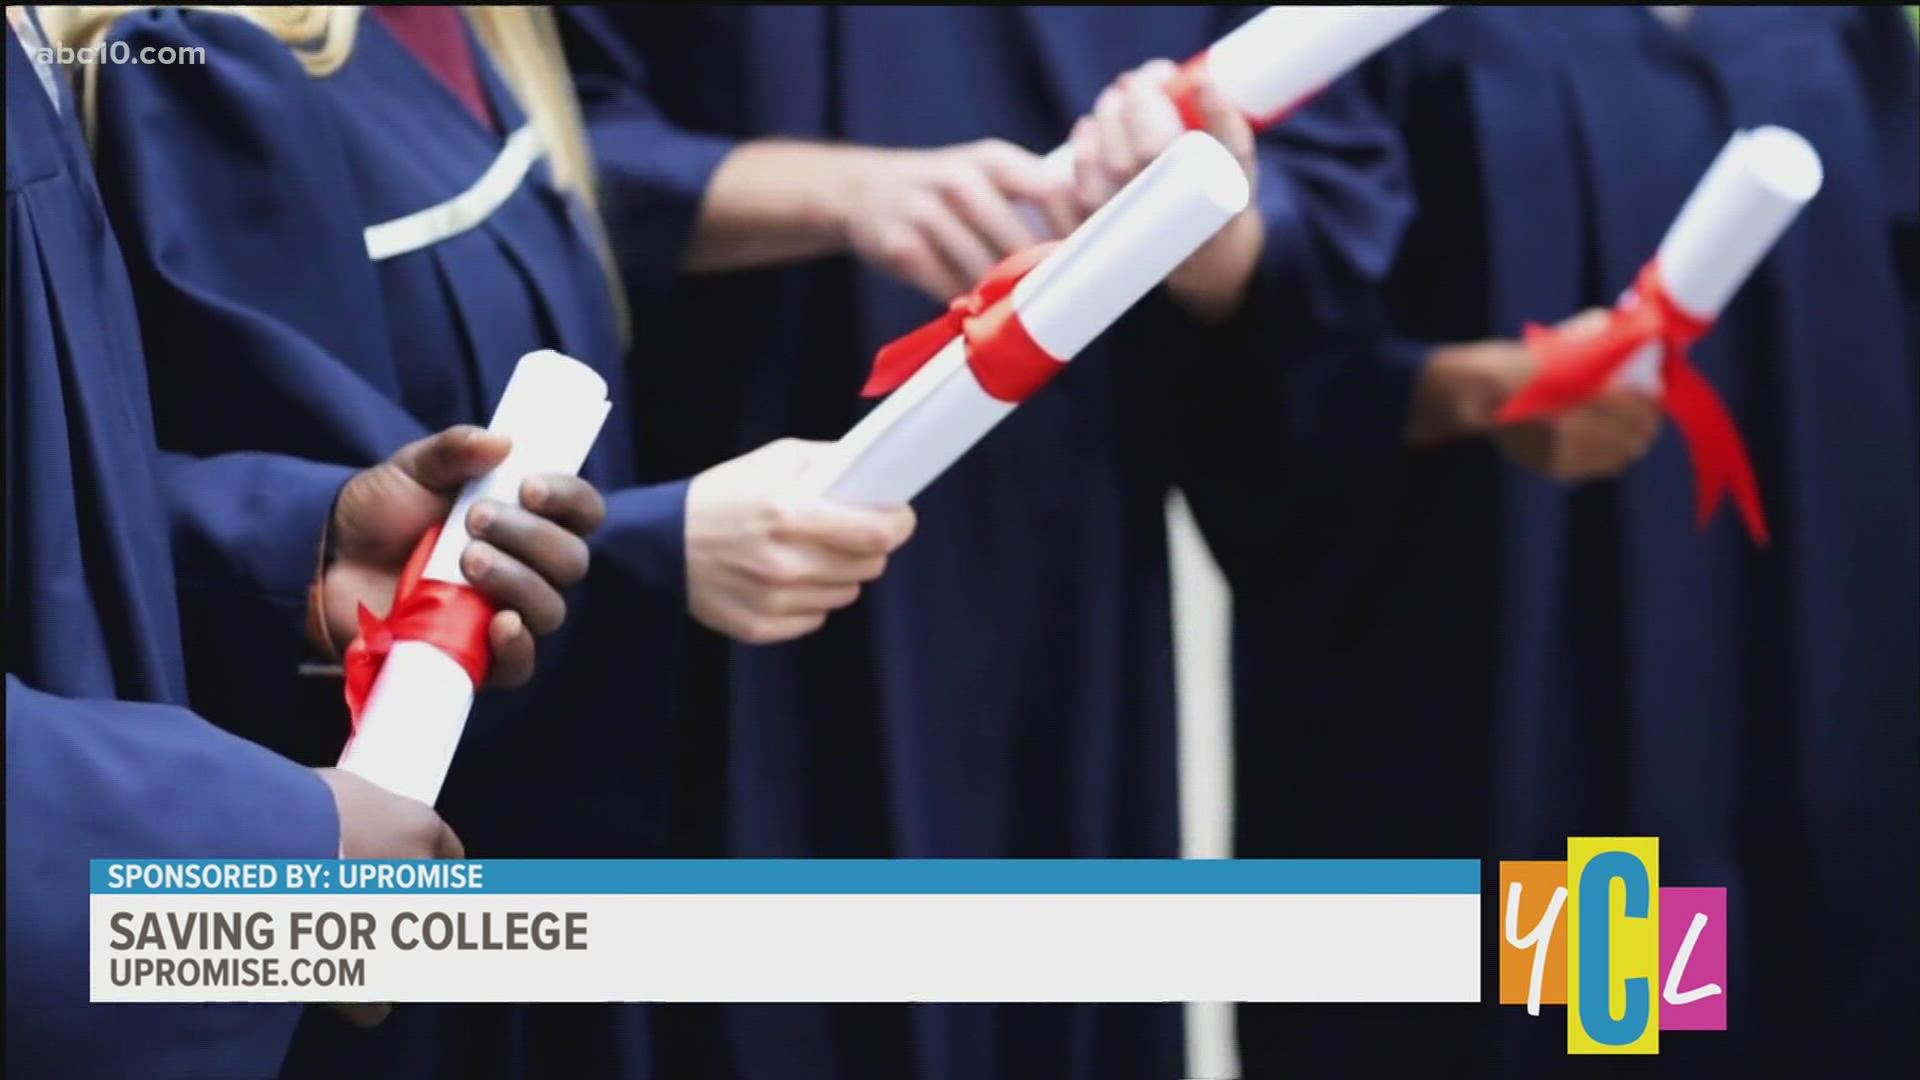 Helpful tips for what every parent should know about paying for college, along with how to save for a higher education. This segment paid for by Upromise.